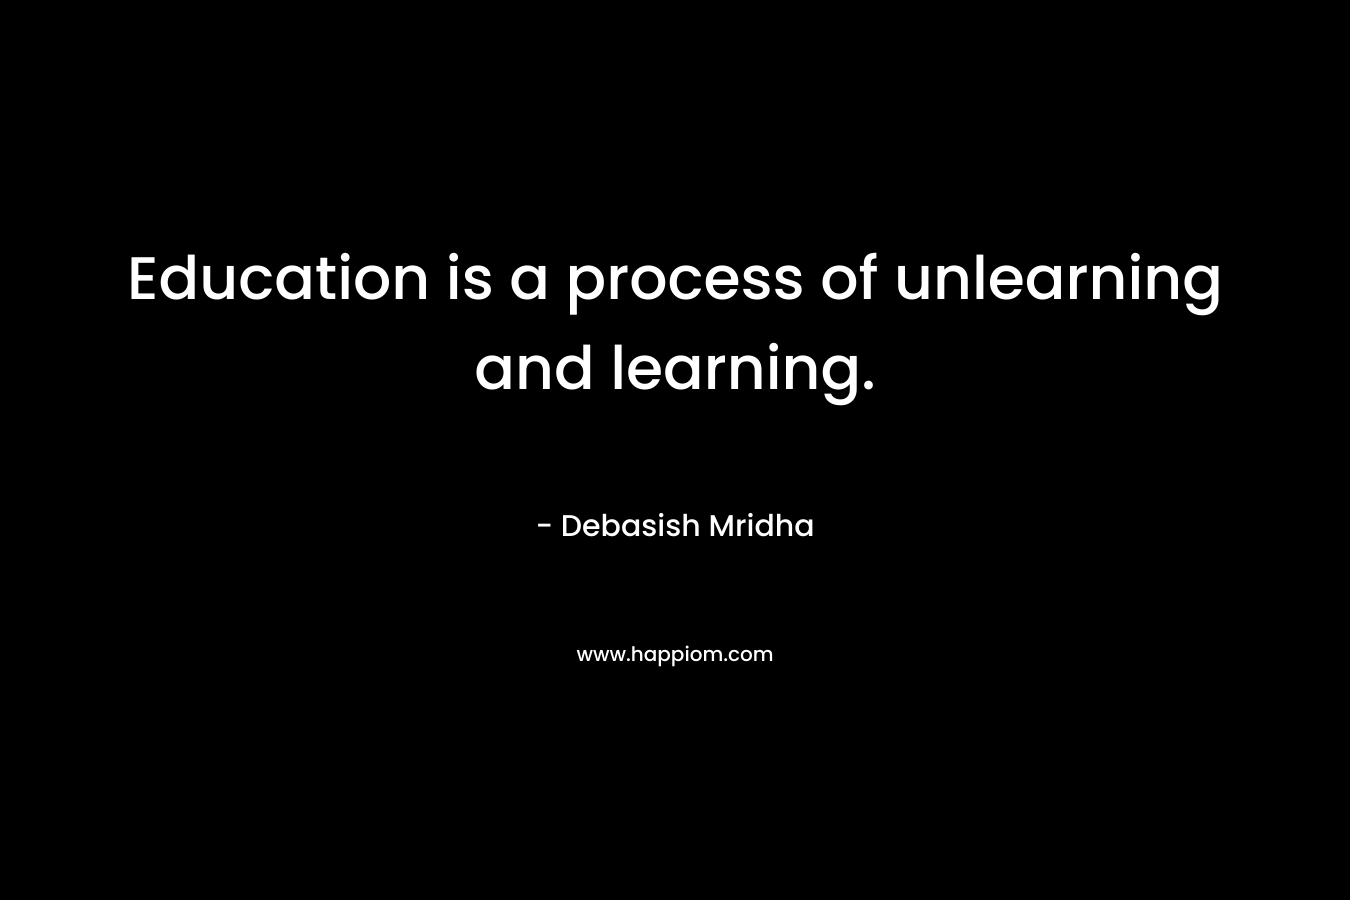 Education is a process of unlearning and learning.